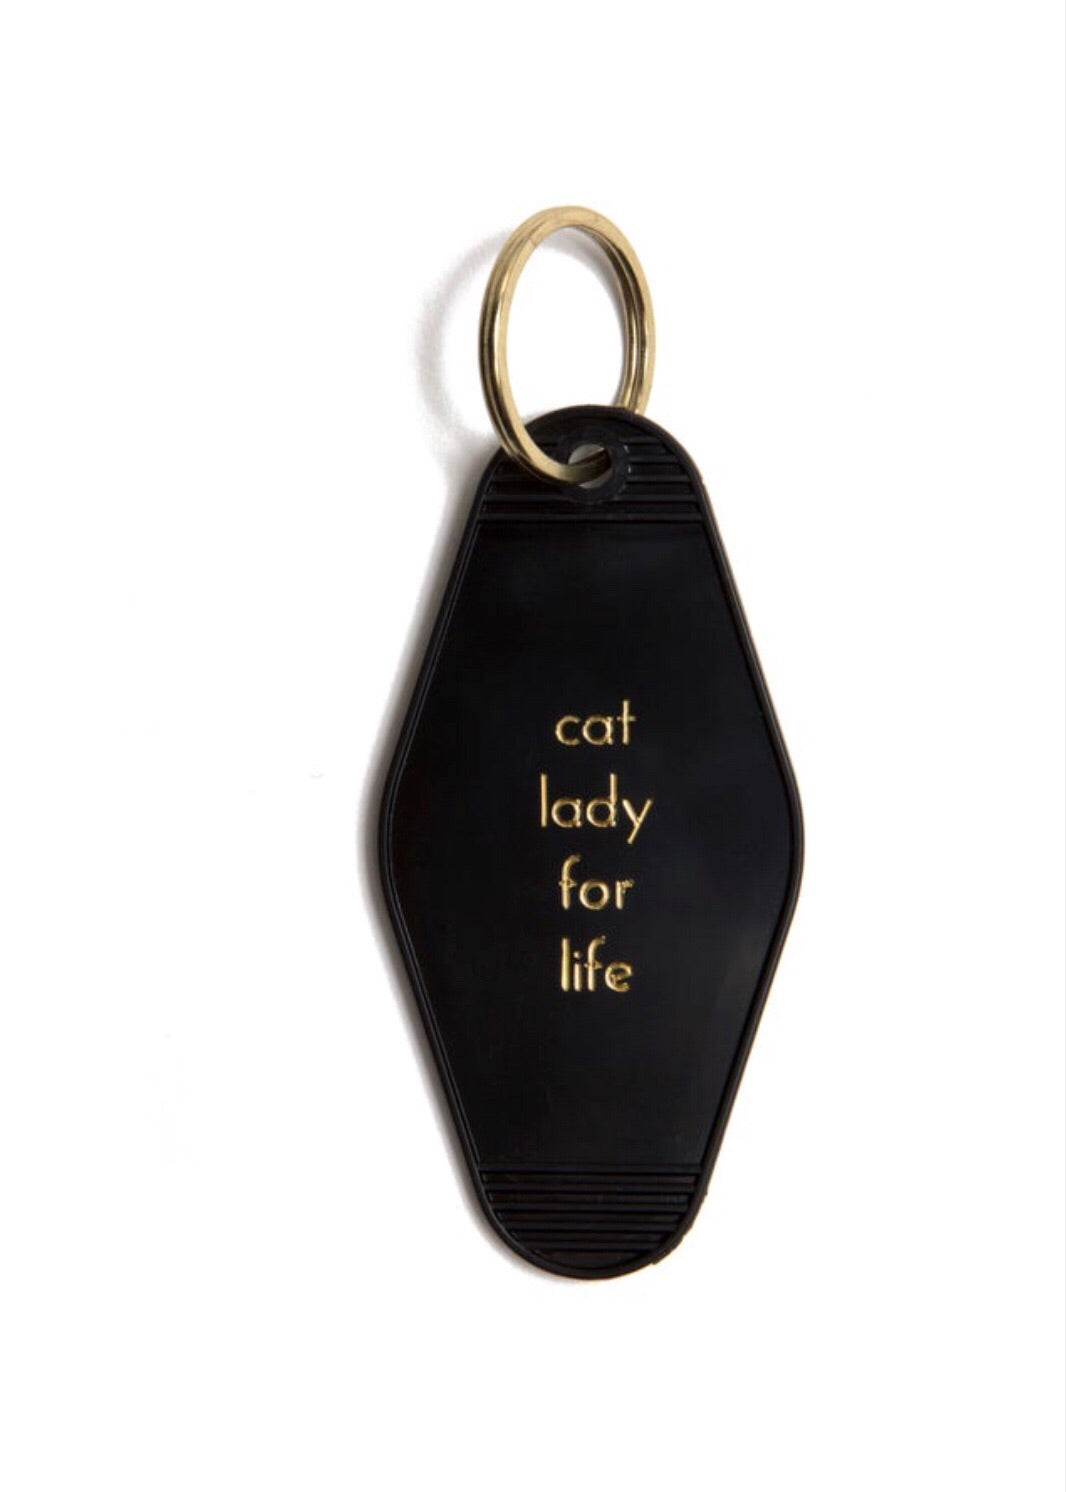 Cat Lady for Life Keychain